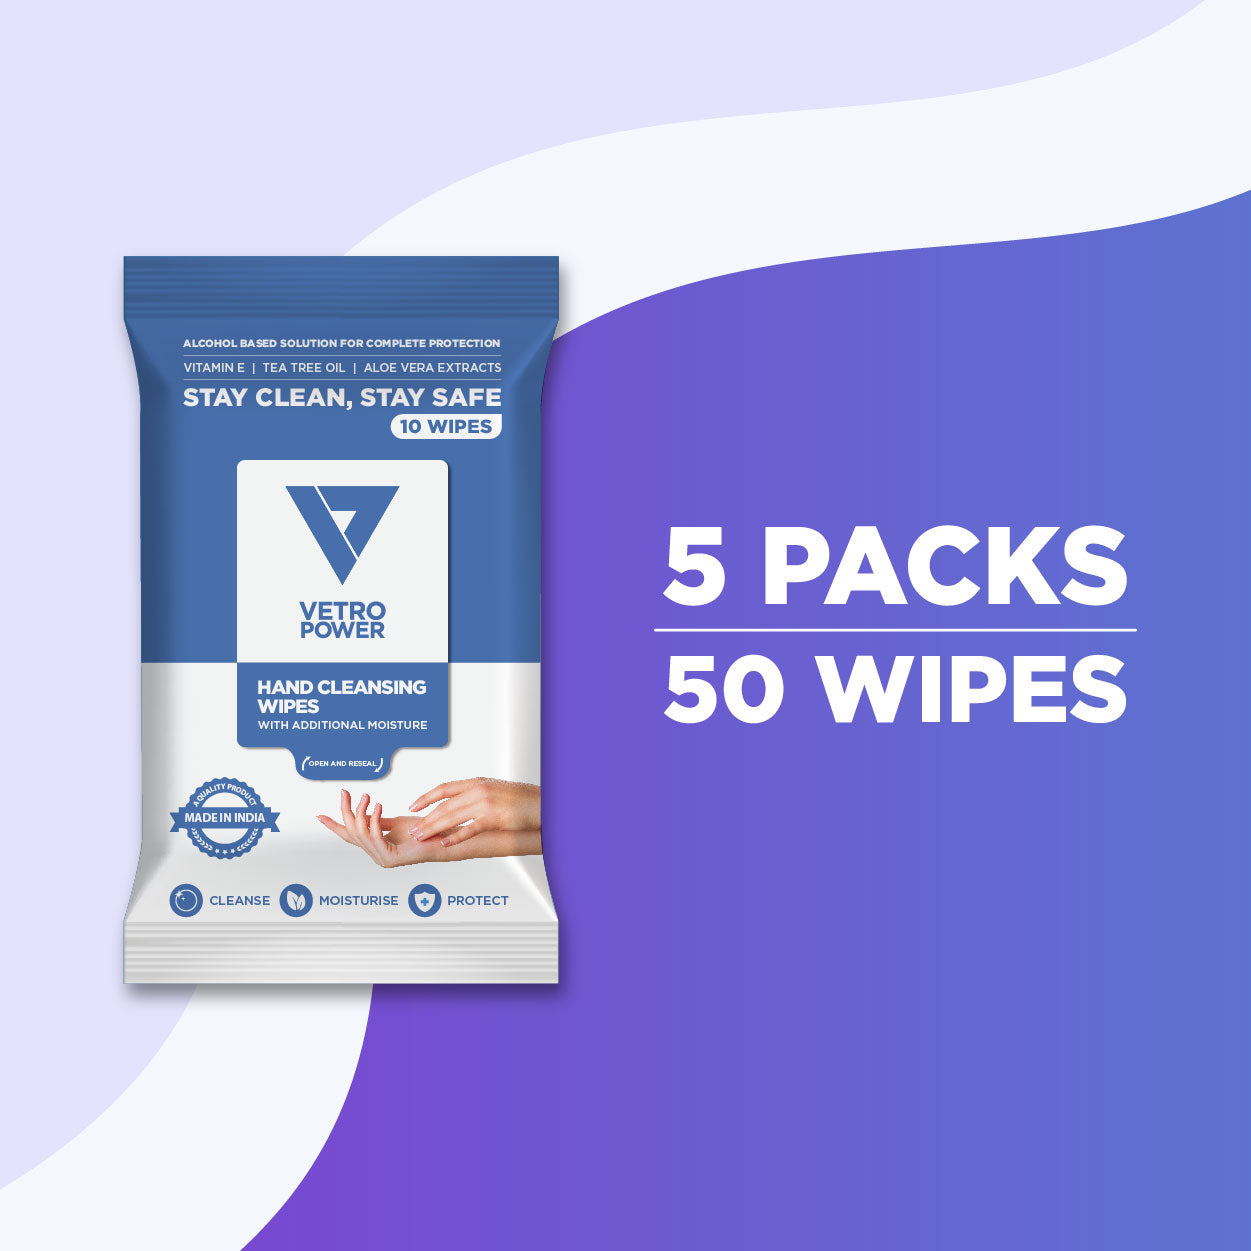 Vetro Power Hand Cleansing Wipes with Aloe Vera, Vitamin E & Tea Tree Oil - 50 Wipes (Pack of 5, 10 each)